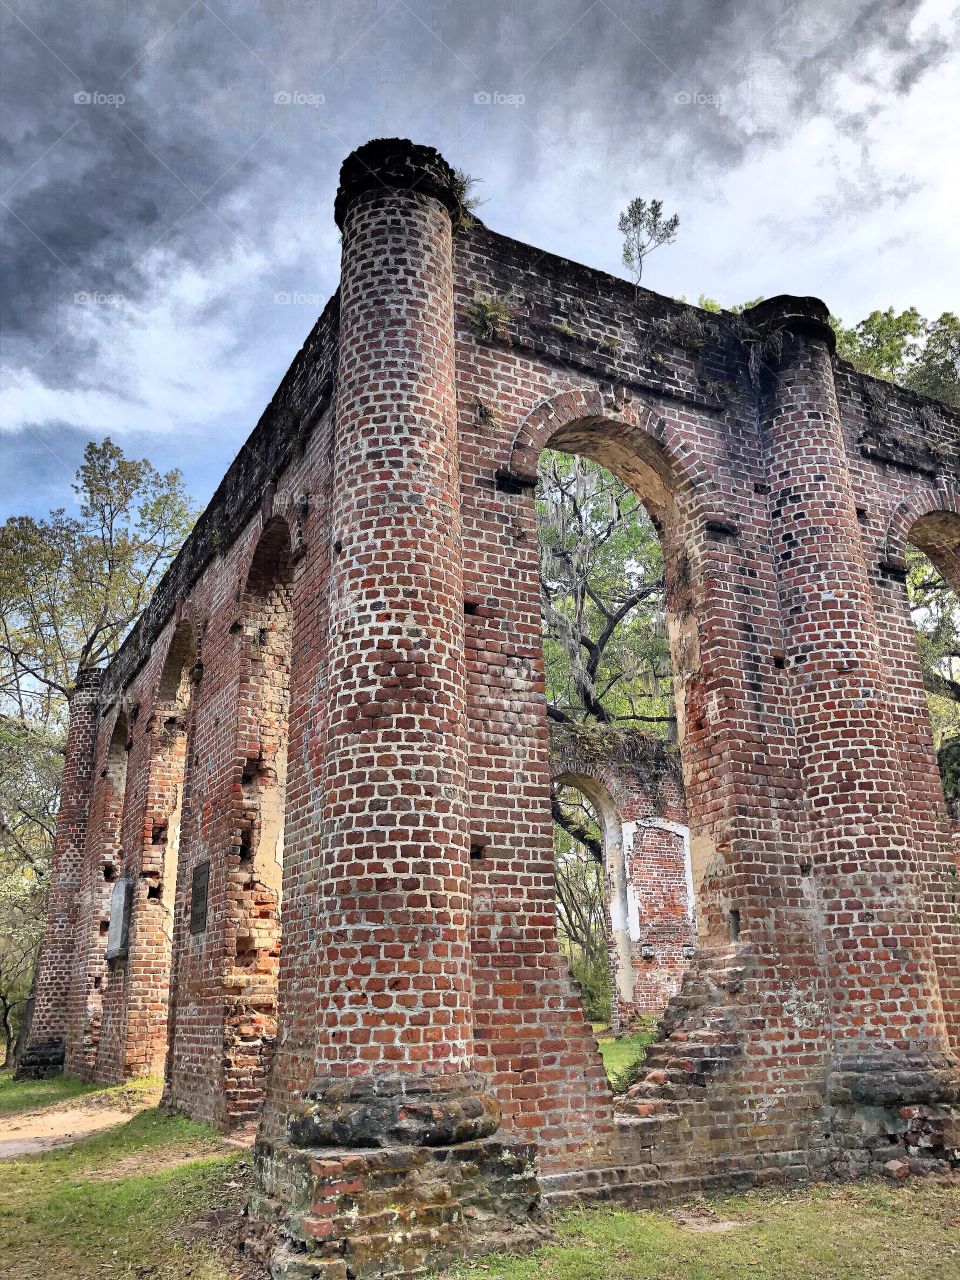 The Old Sheldon Church Ruins located in Yemassee South Carolina built 1745-1753. The parish was burned by the British during the Revolutionary War in 1779 then rebuilt in 1826 and burned again in 1865 by the Federal Army during the Civil War. 